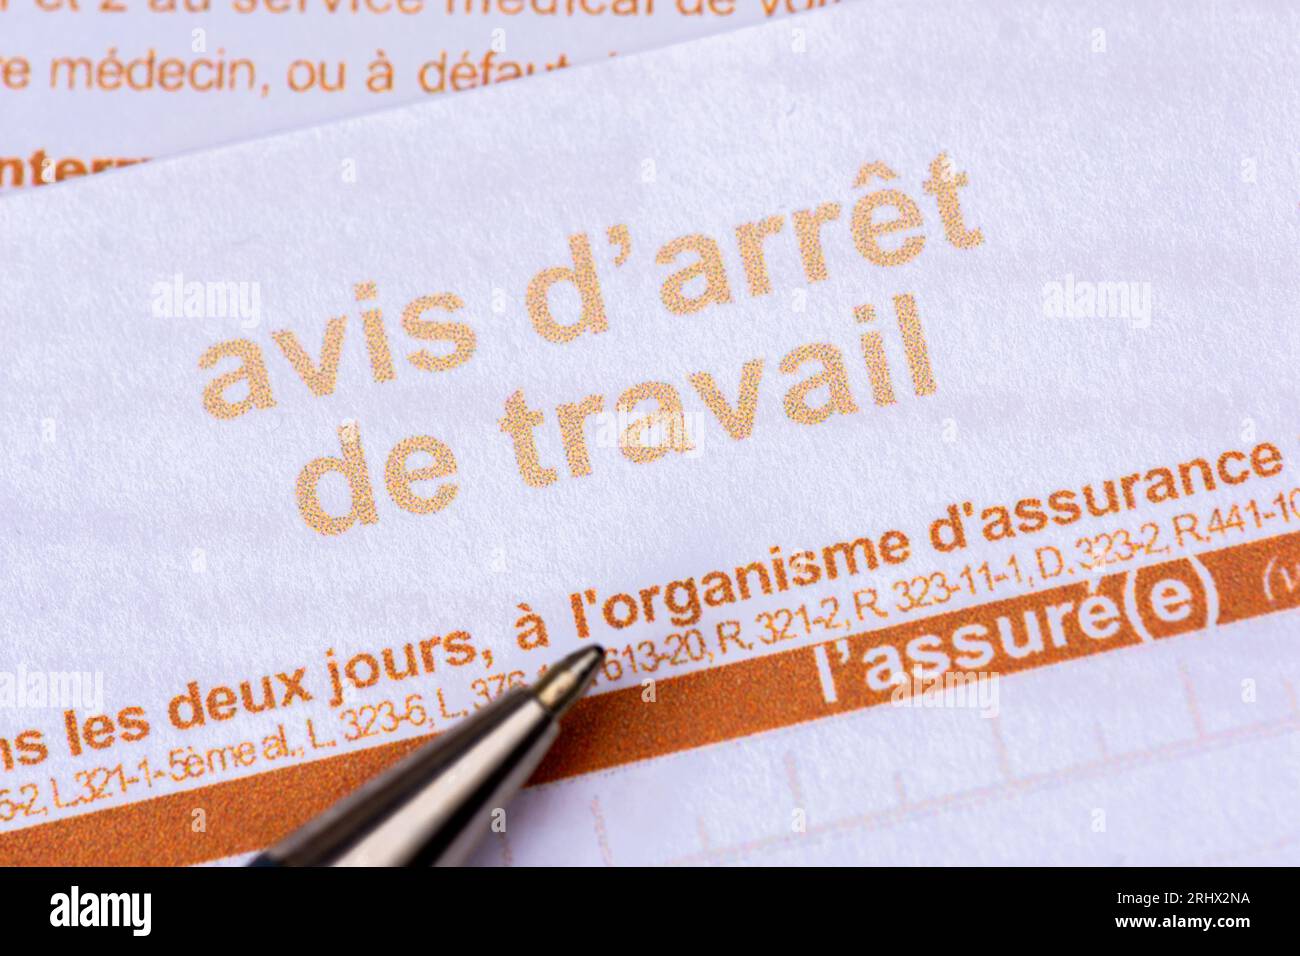 France: Close-up of an official sick leave form from the French social security that the doctor gives to patients when they are unable to work Stock Photo